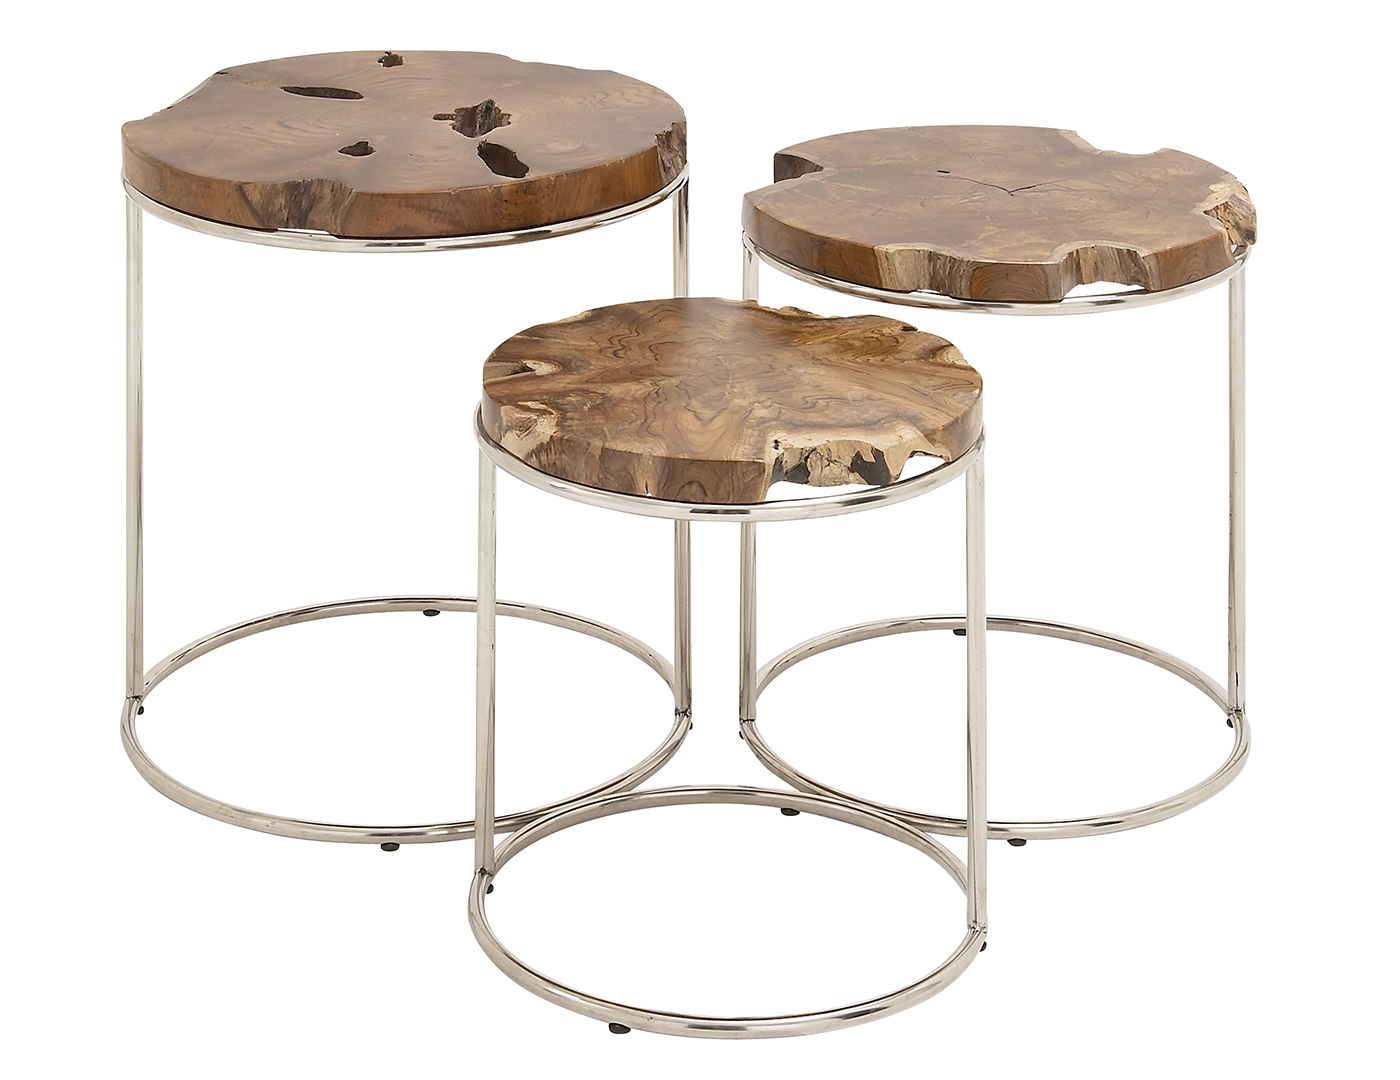 decor accents tables steinhafels half circle accent table teak and metal round set kids furniture antique white square coffee outdoor lamps oak chairside small patio side lamp